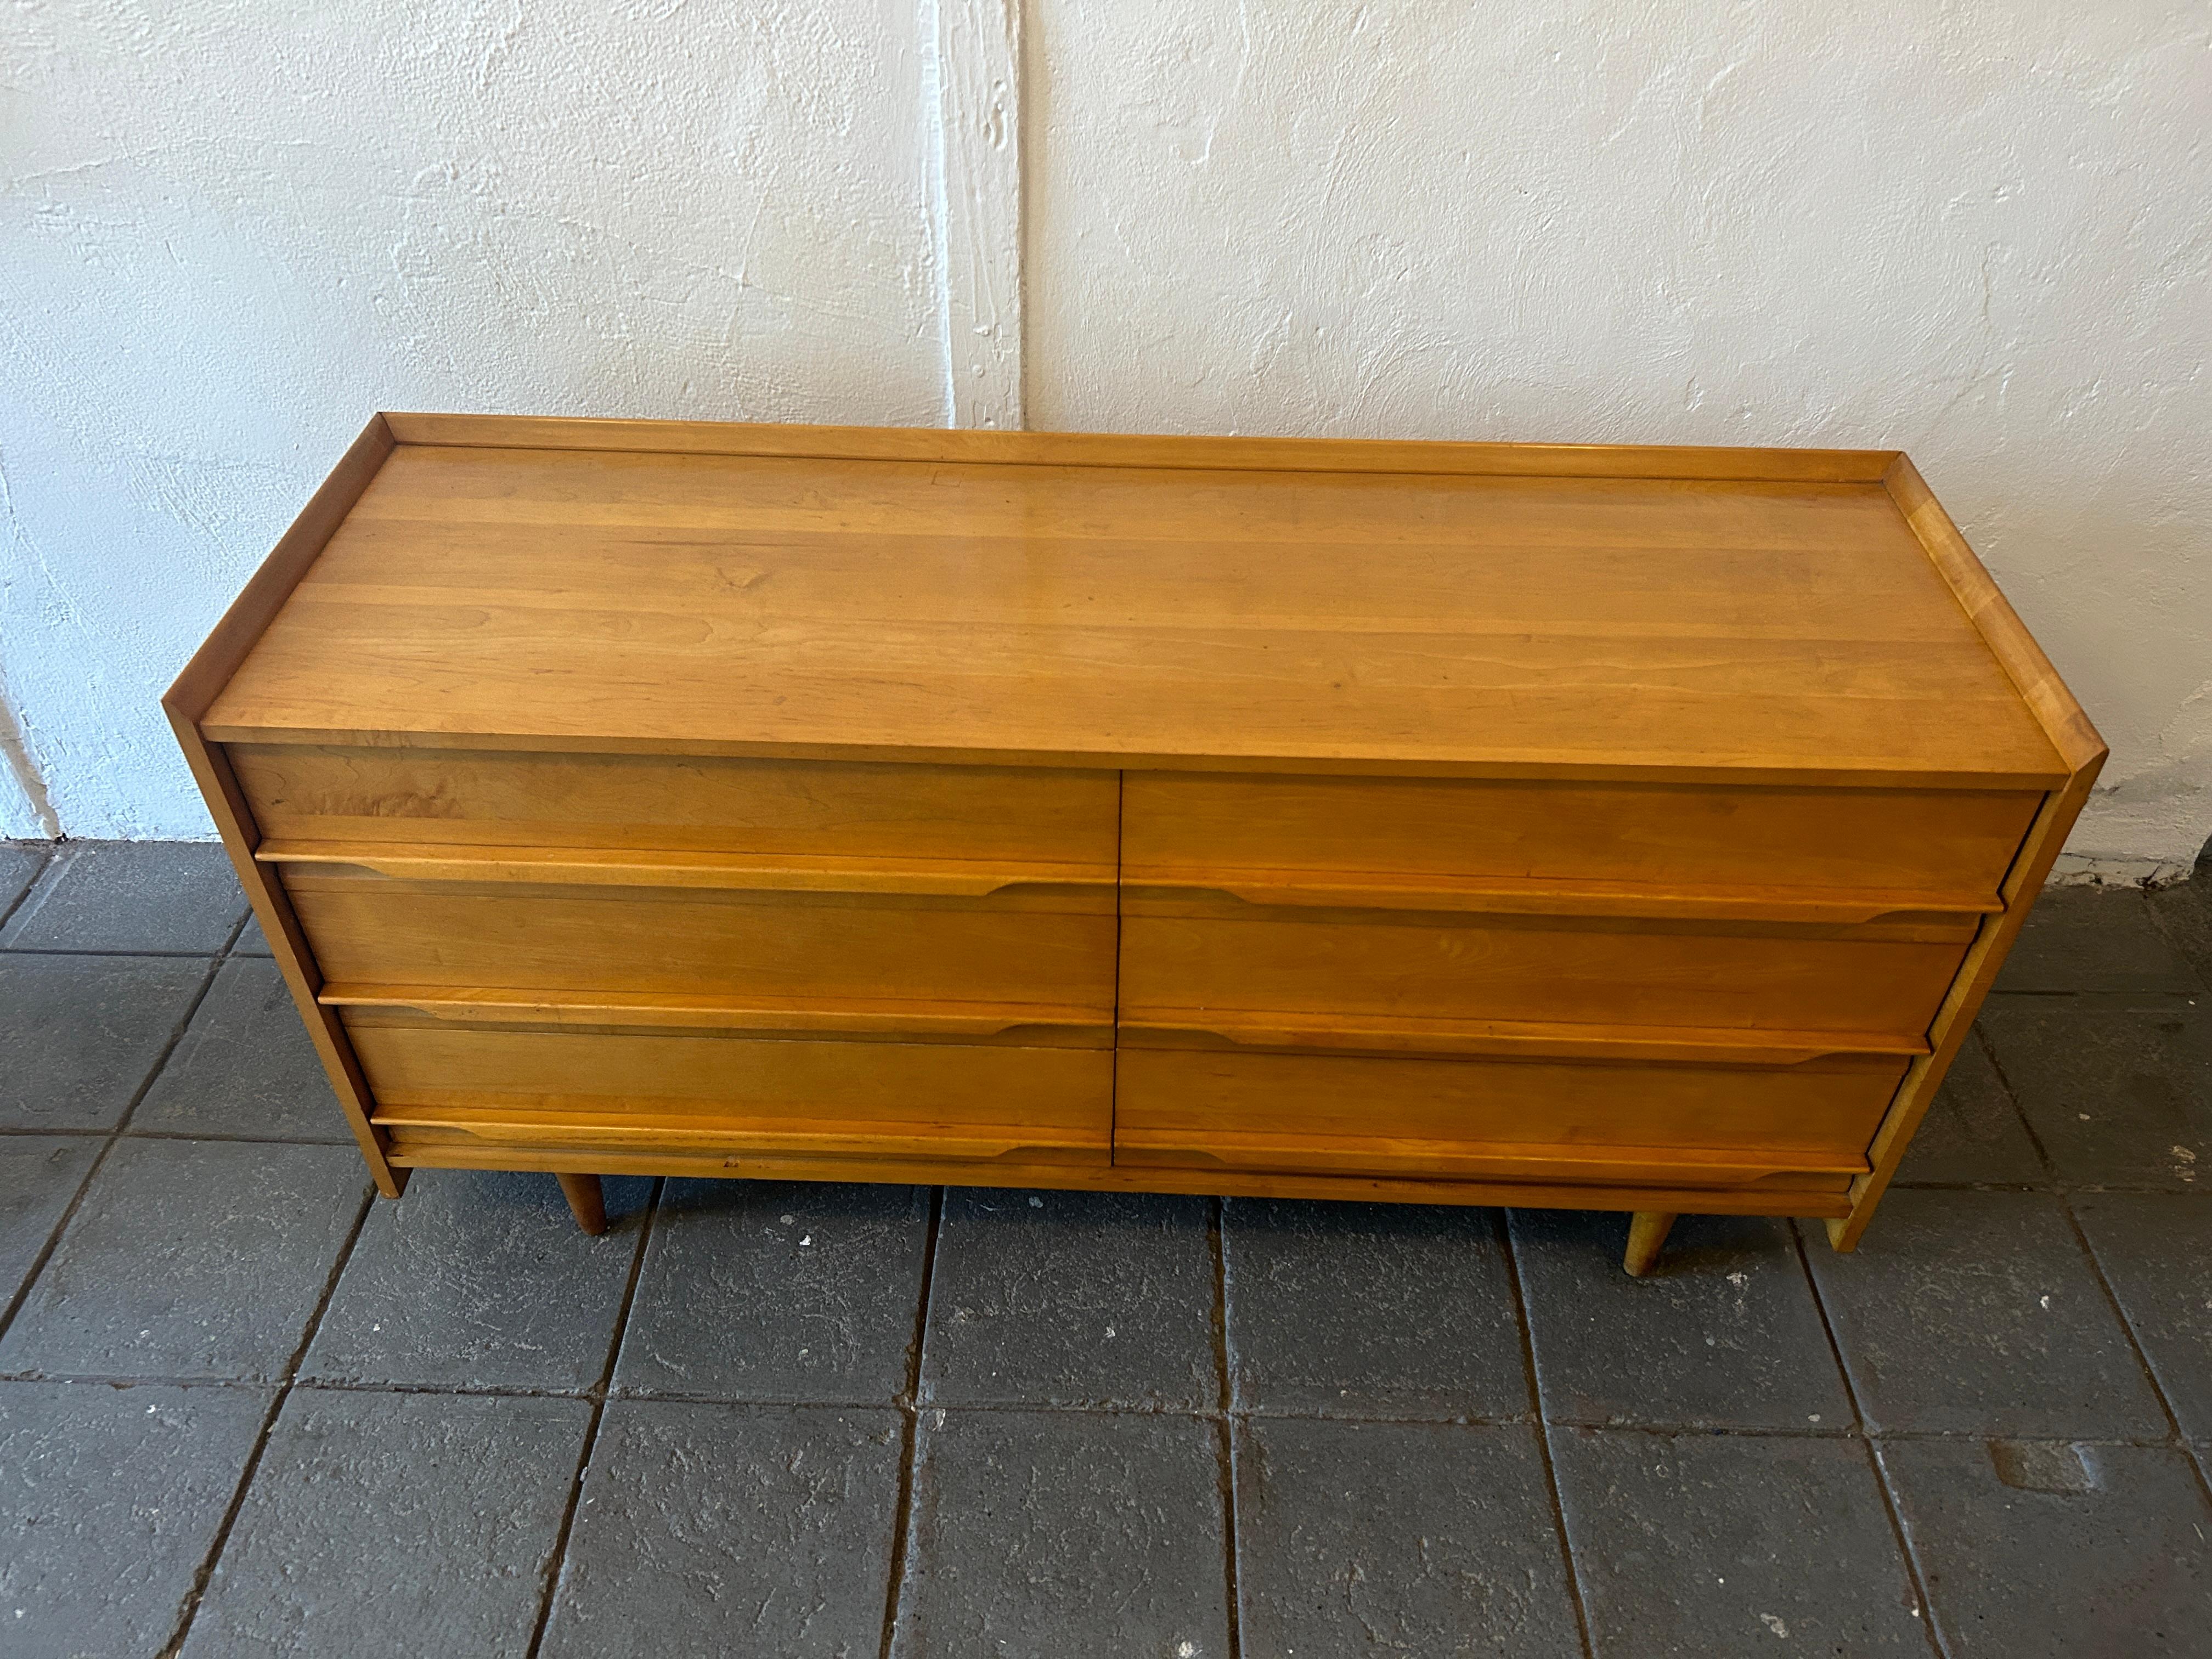 Unique Mid-Century Modern American solid maple 6 drawer low long dresser by Crawford. All solid maple construction with carved handles and sits on 4 tapered legs. Vintage original condition. Shows wear on top surface drawers clean inside. Metal tag